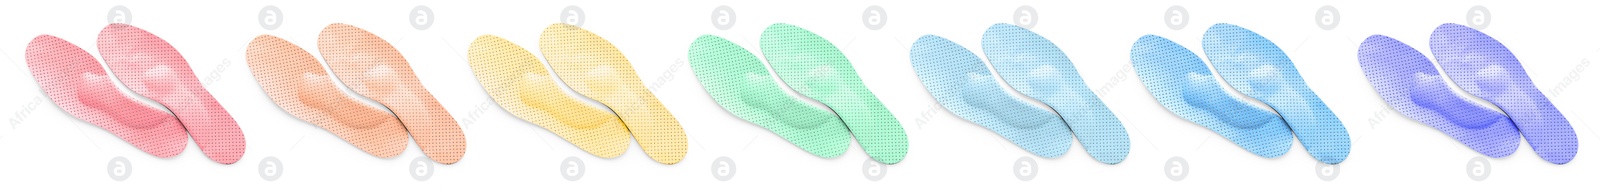 Image of Set with colorful orthopedic insoles on white background, top view. Banner design